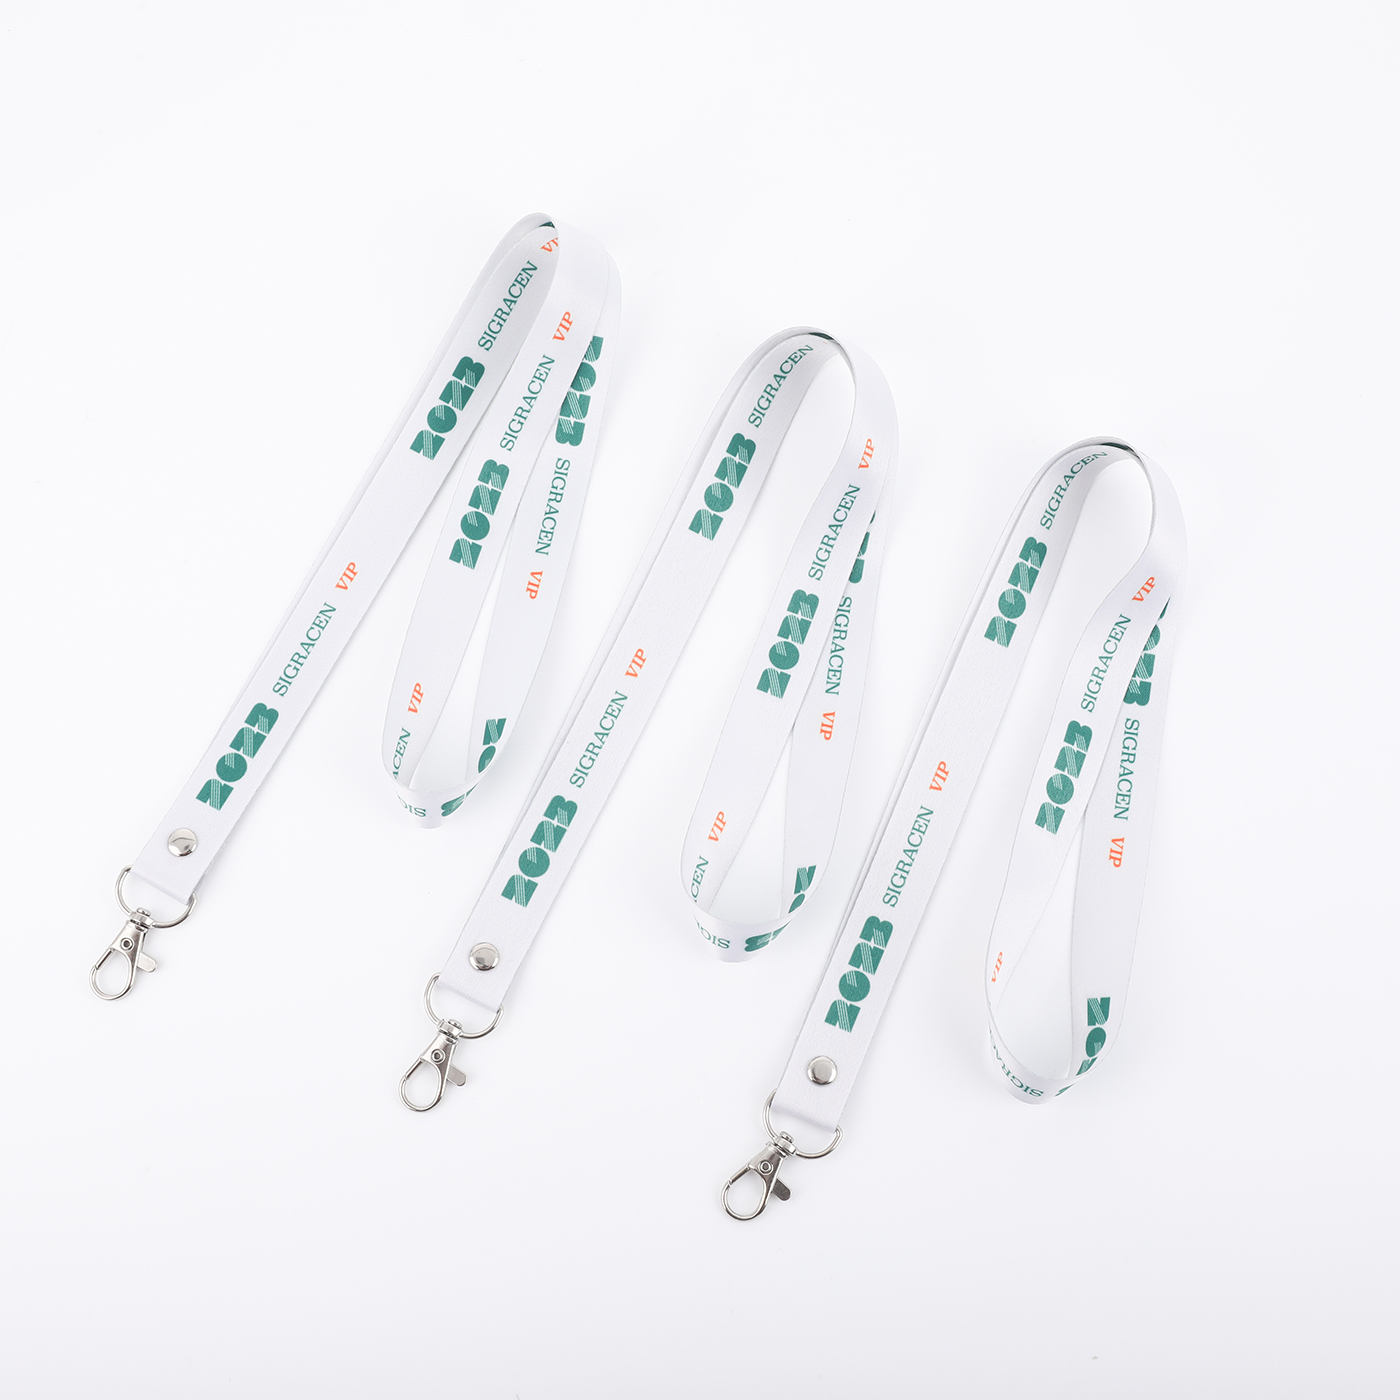 Promotional Lanyard With Safety Buckle2